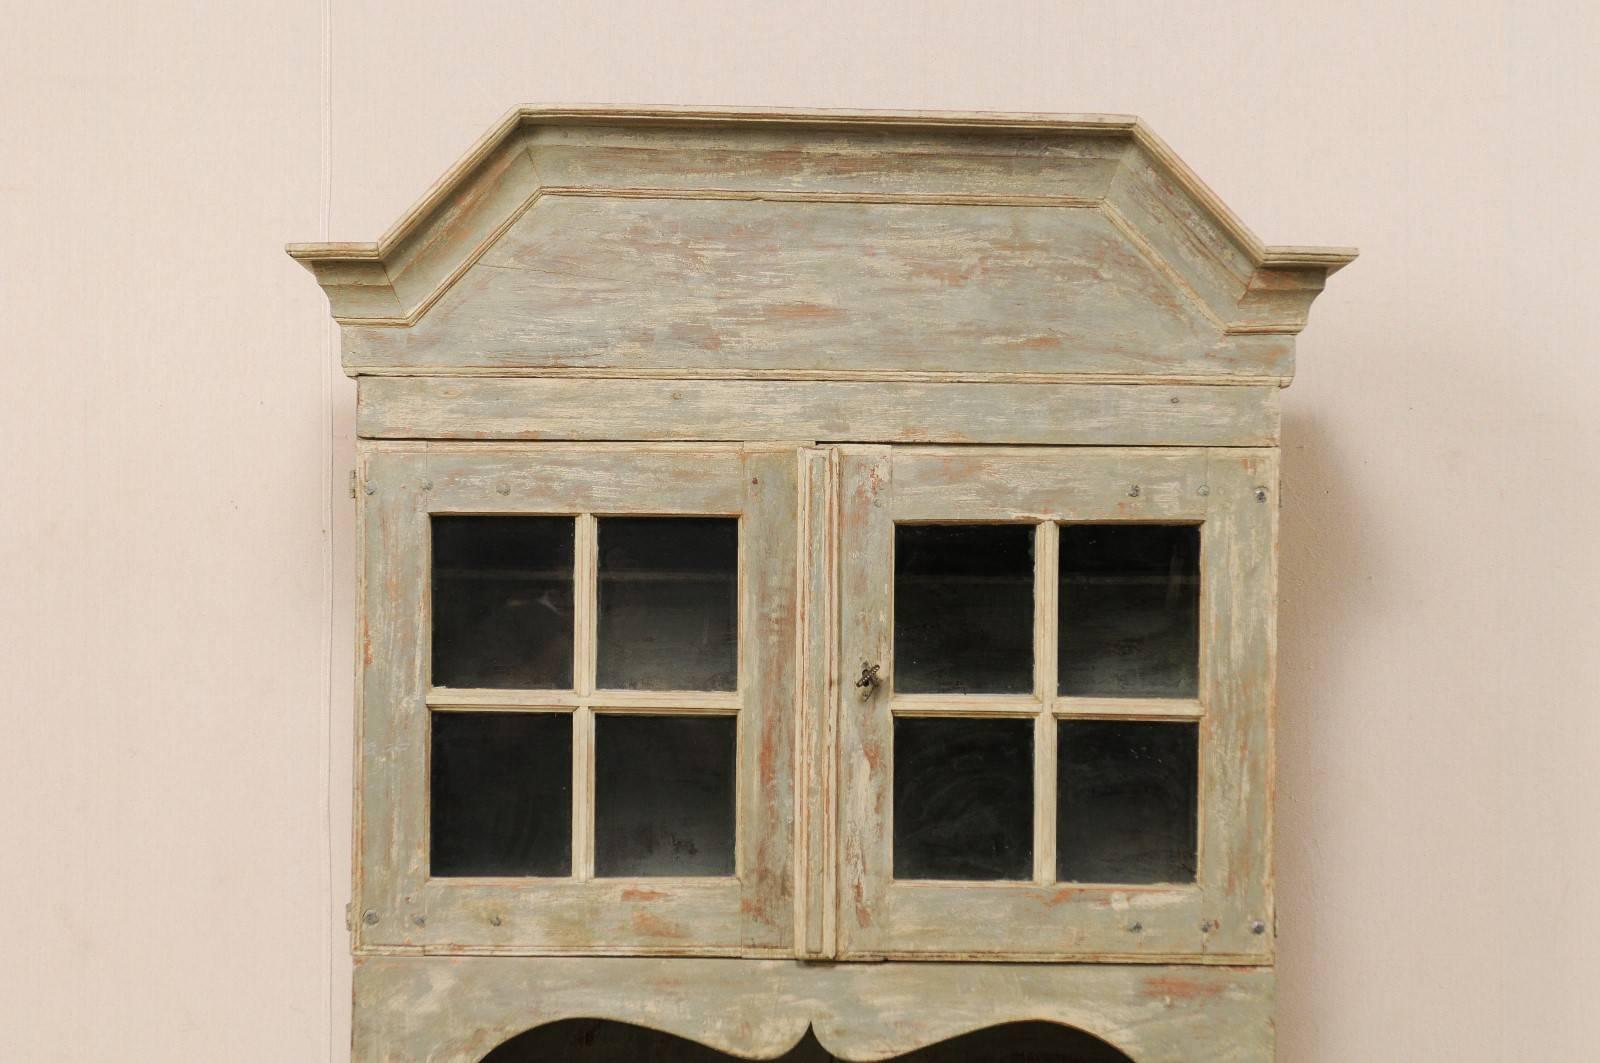 Painted Early 19th Century Swedish Scraped Finish Cupboard with Elegant Scalloped Shapes